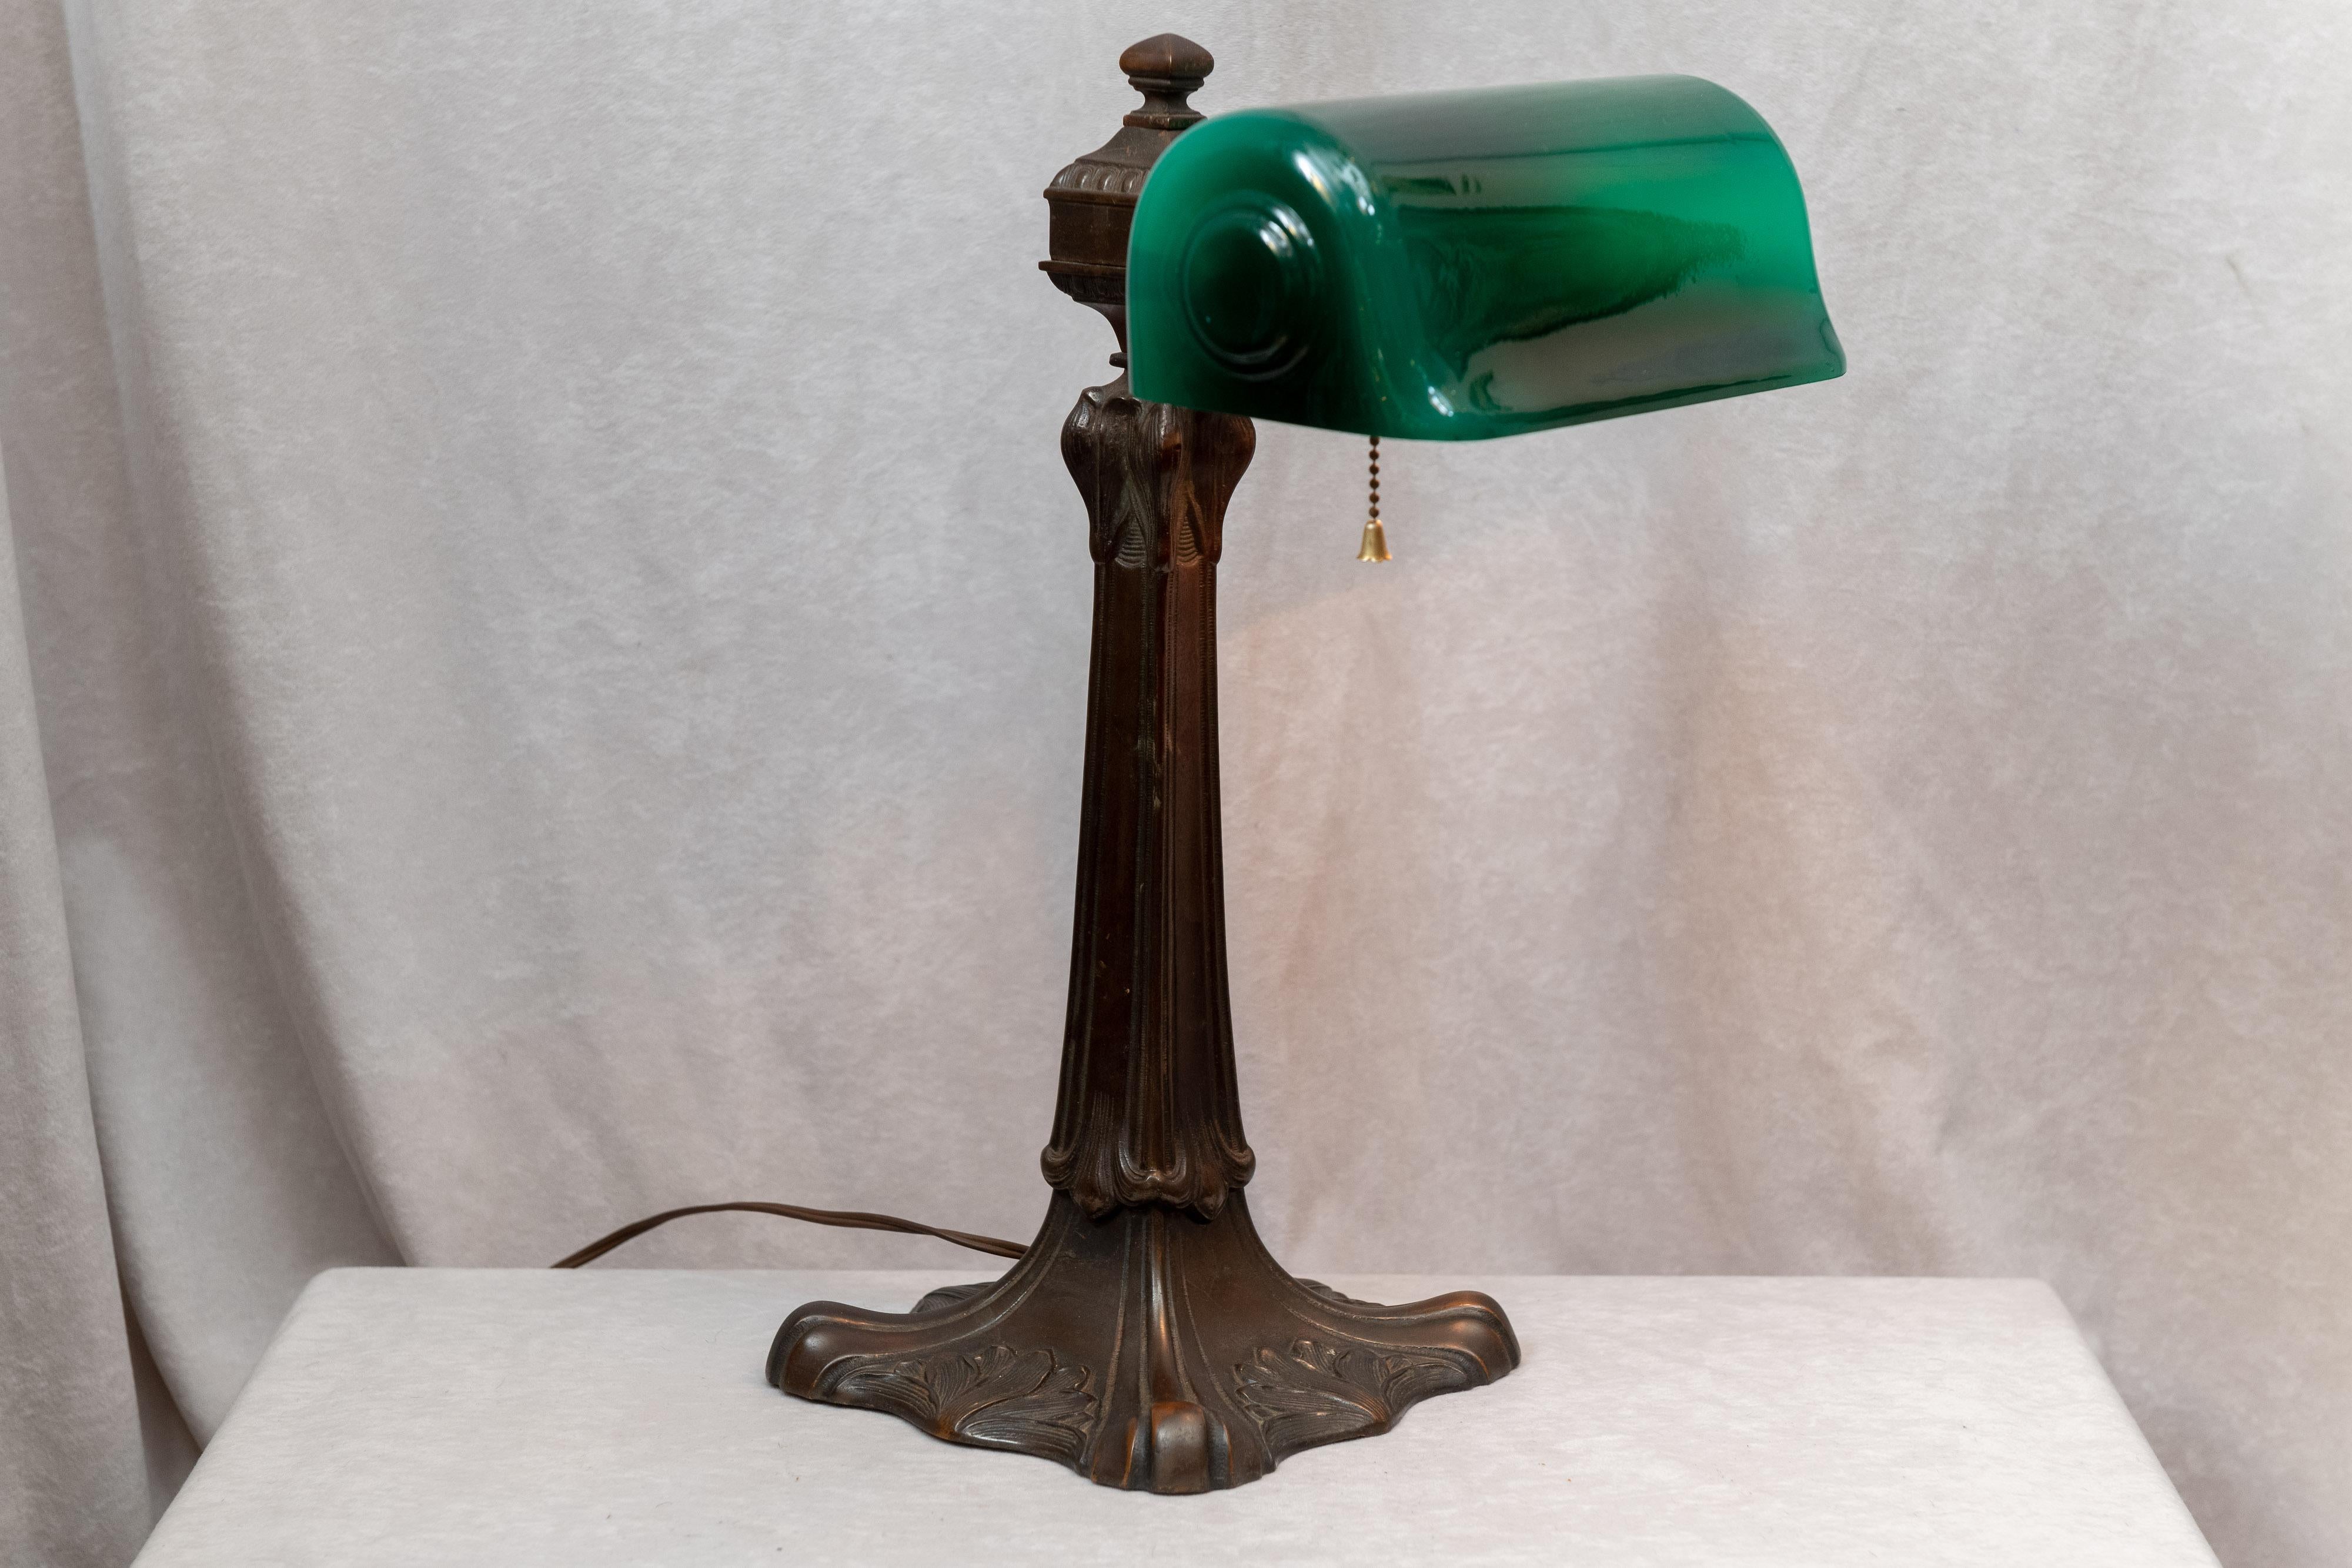 This is the desk lamp folks are always looking to purchase. Verdelite was one of the premier makers of these banker's lamps. What separates this from the general look is the unusual and wonderful art nouveau base. The base has a knuckle where you